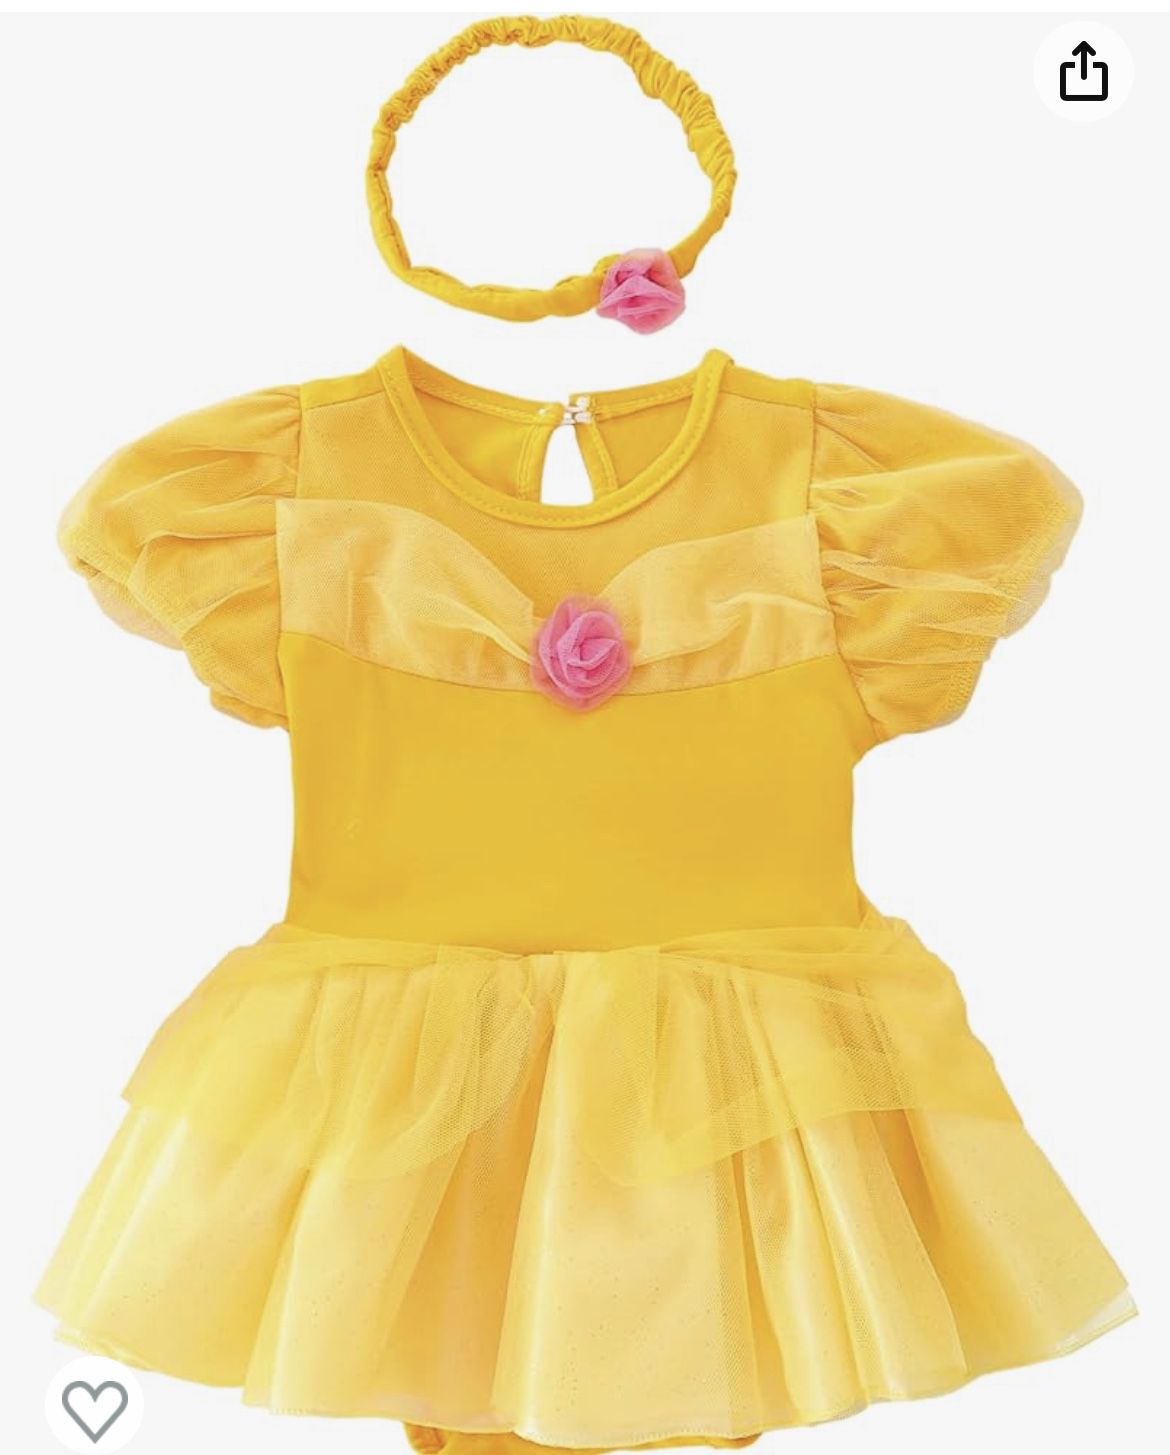 Belle baby girl costume 6-12 months